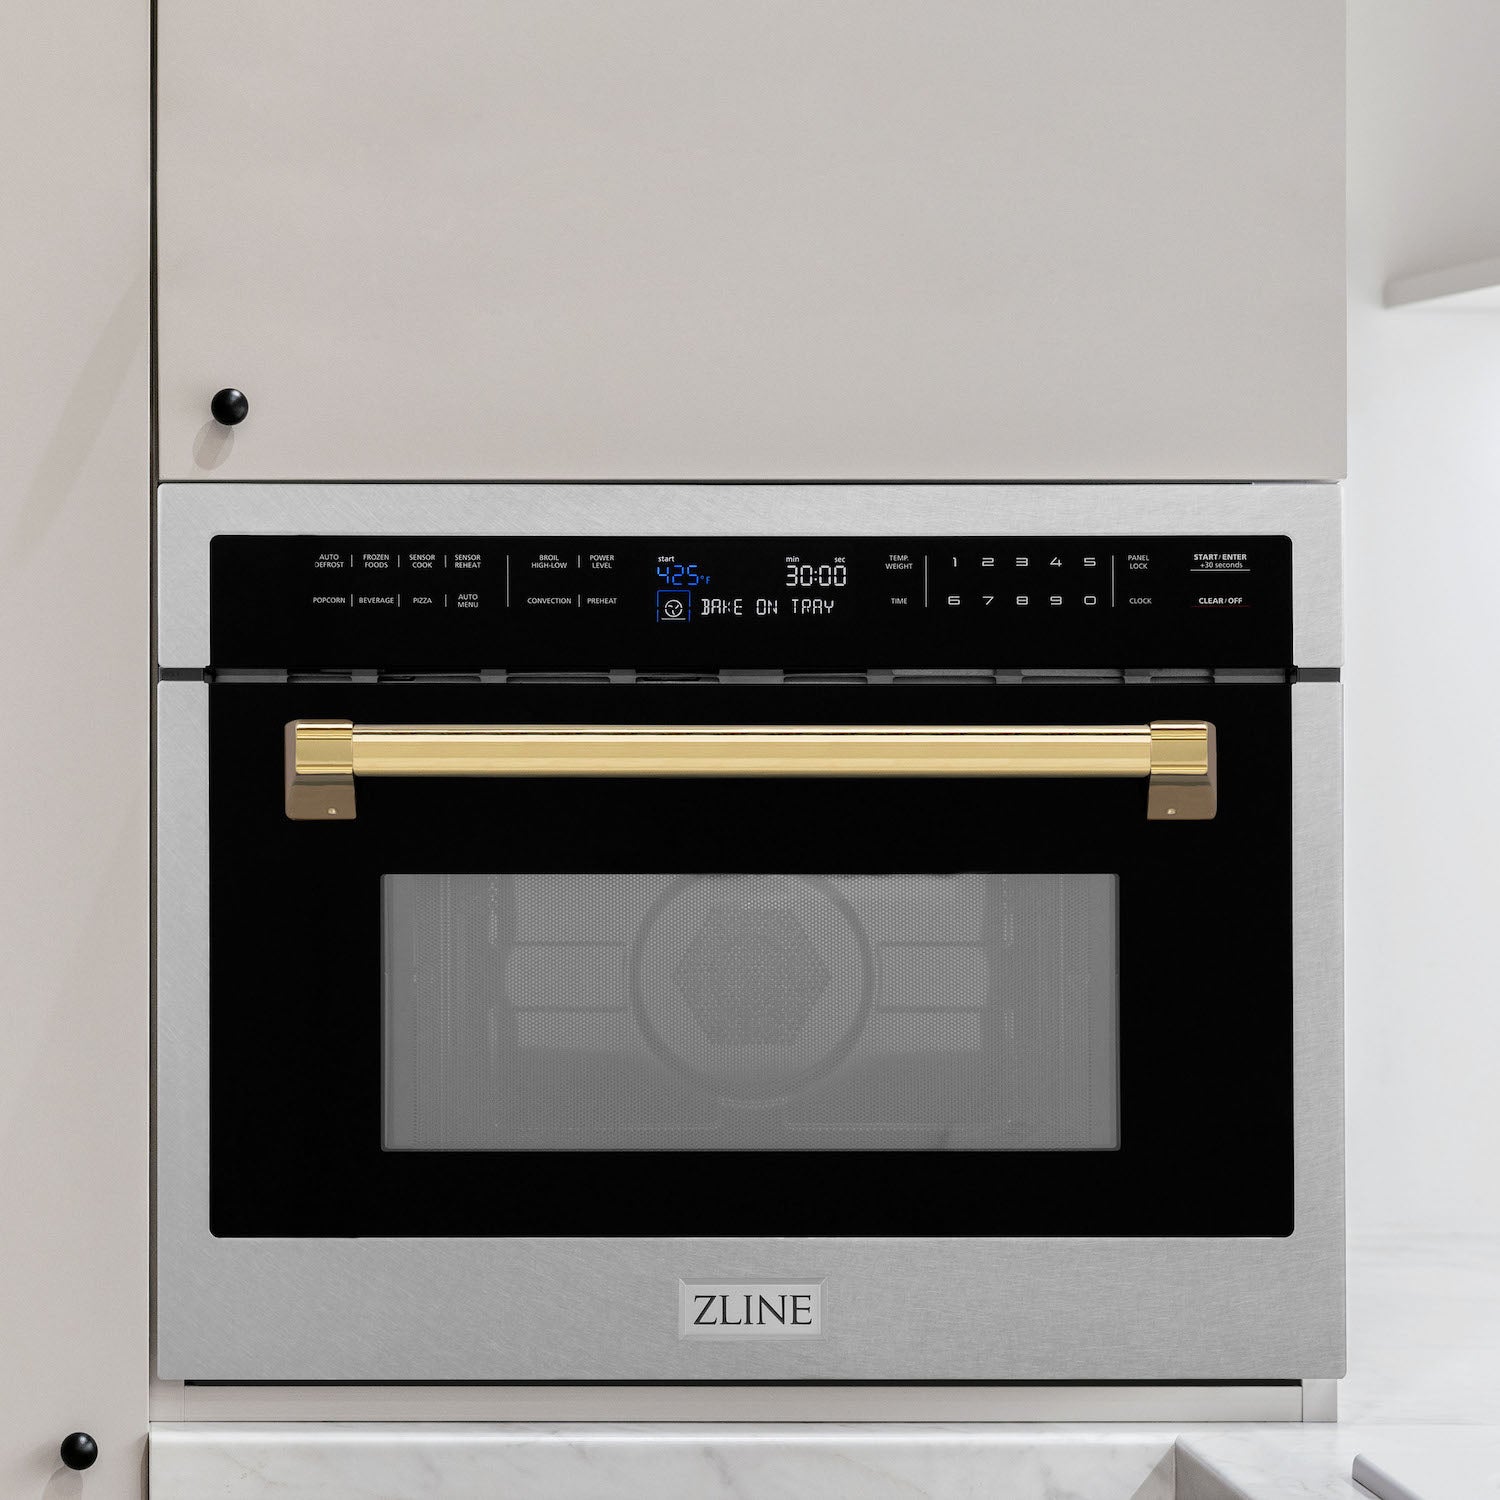 ZLINE Autograph Edition 24 in. 1.6 cu ft. Built-in Convection Microwave Oven in DuraSnow Stainless Steel with Polished Gold Accents built-in to white kitchen wall.